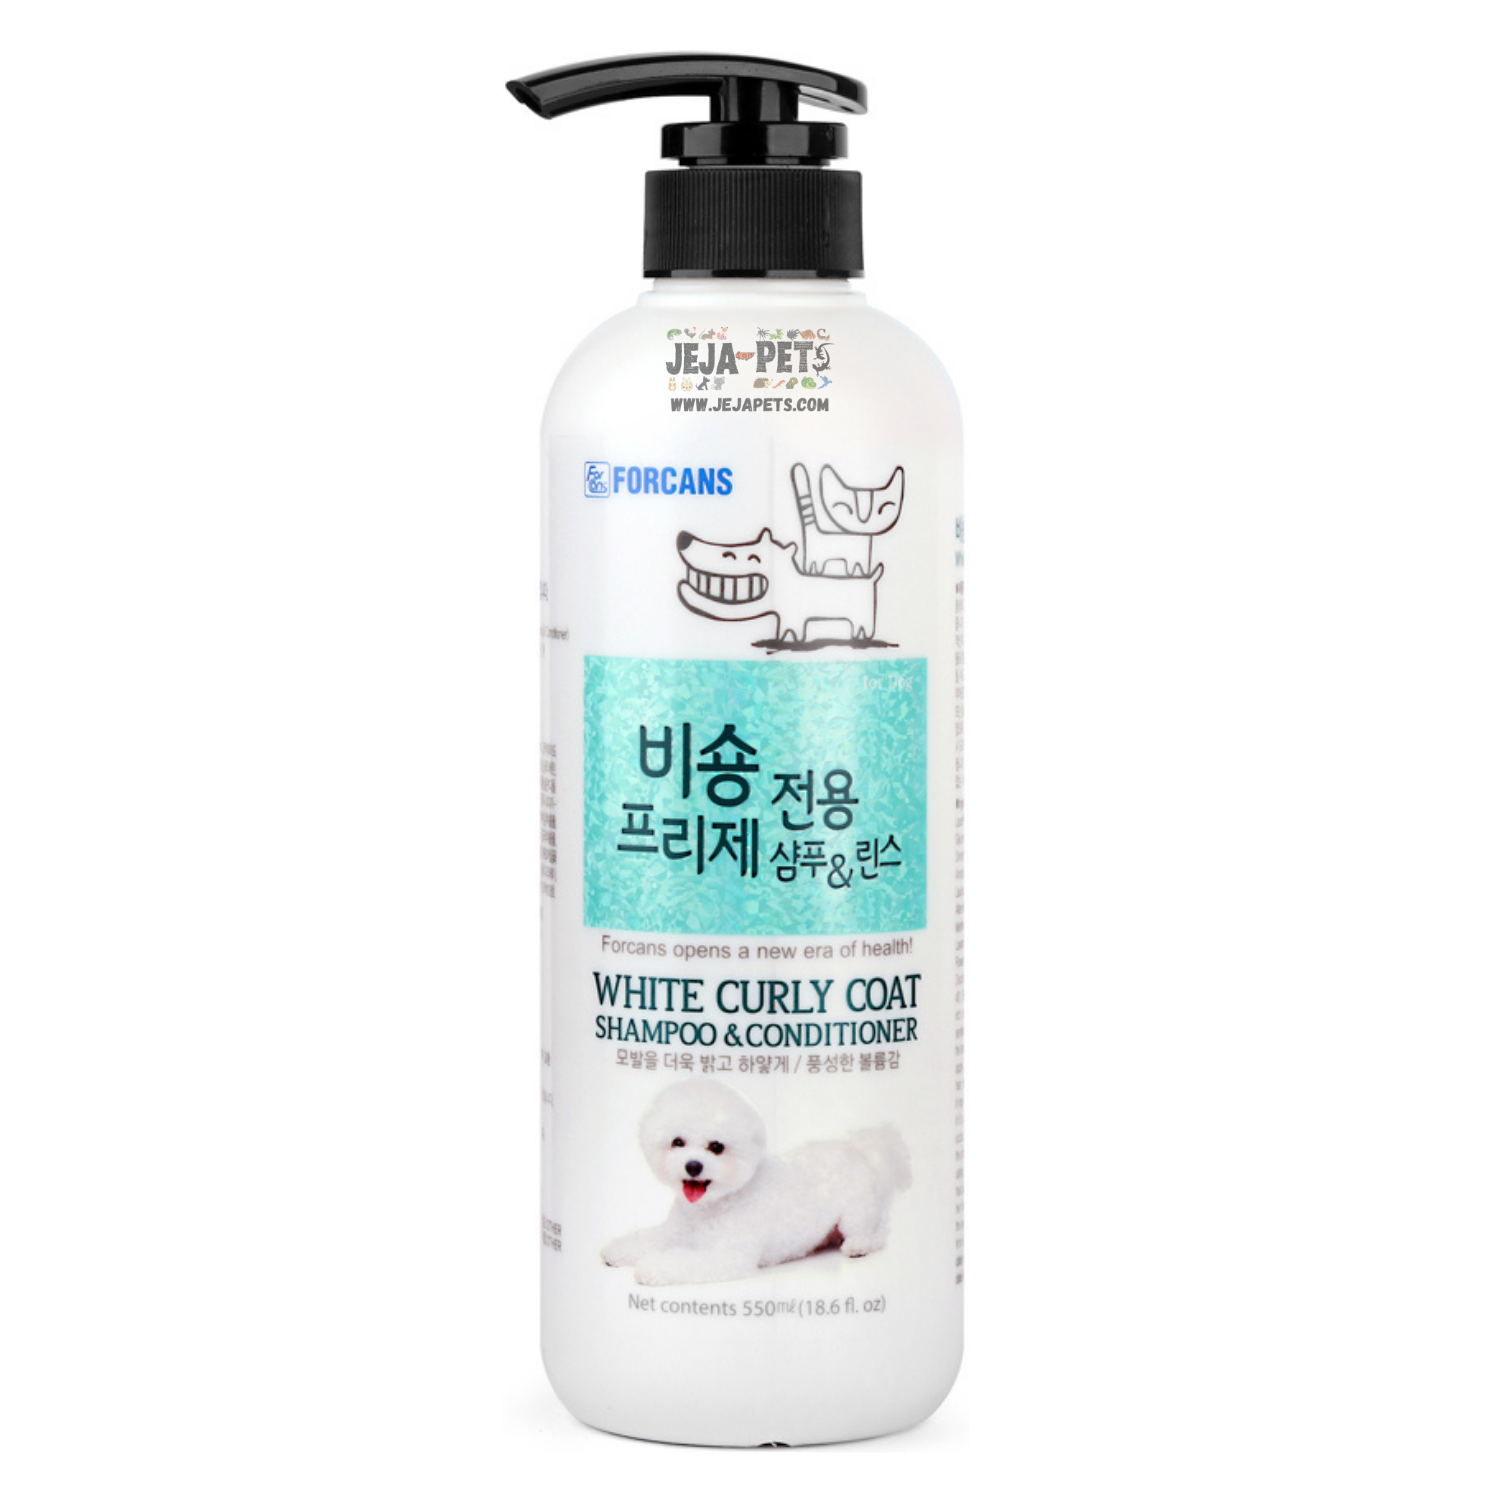 Forbis Forcans White Curly Coat Shampoo & Conditioner - 550ml